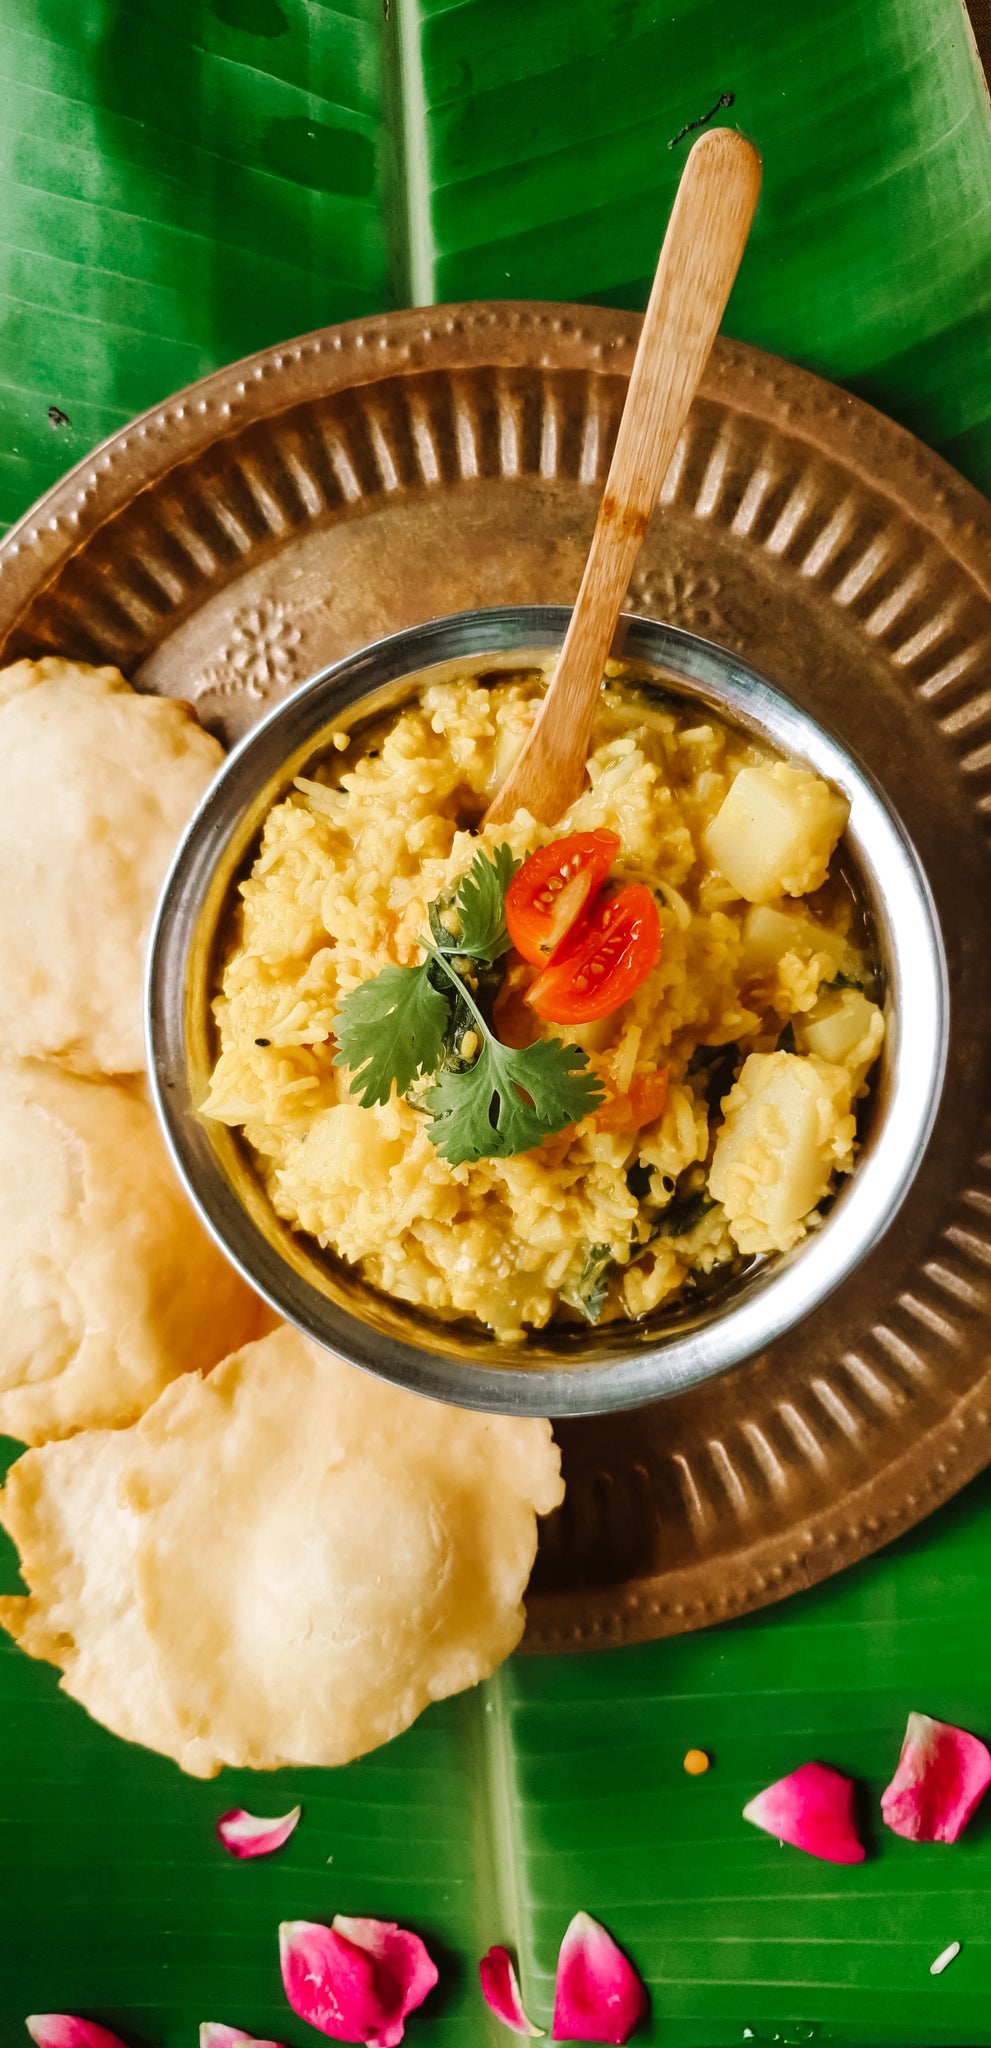 traditional Indian kitchari is cooked with potatoes and cauliflower for beautifully balanced cleansing dish. Perfect for weight loss and it keeps you fuller for longer and the spice blend is incredible gentle on the digestion